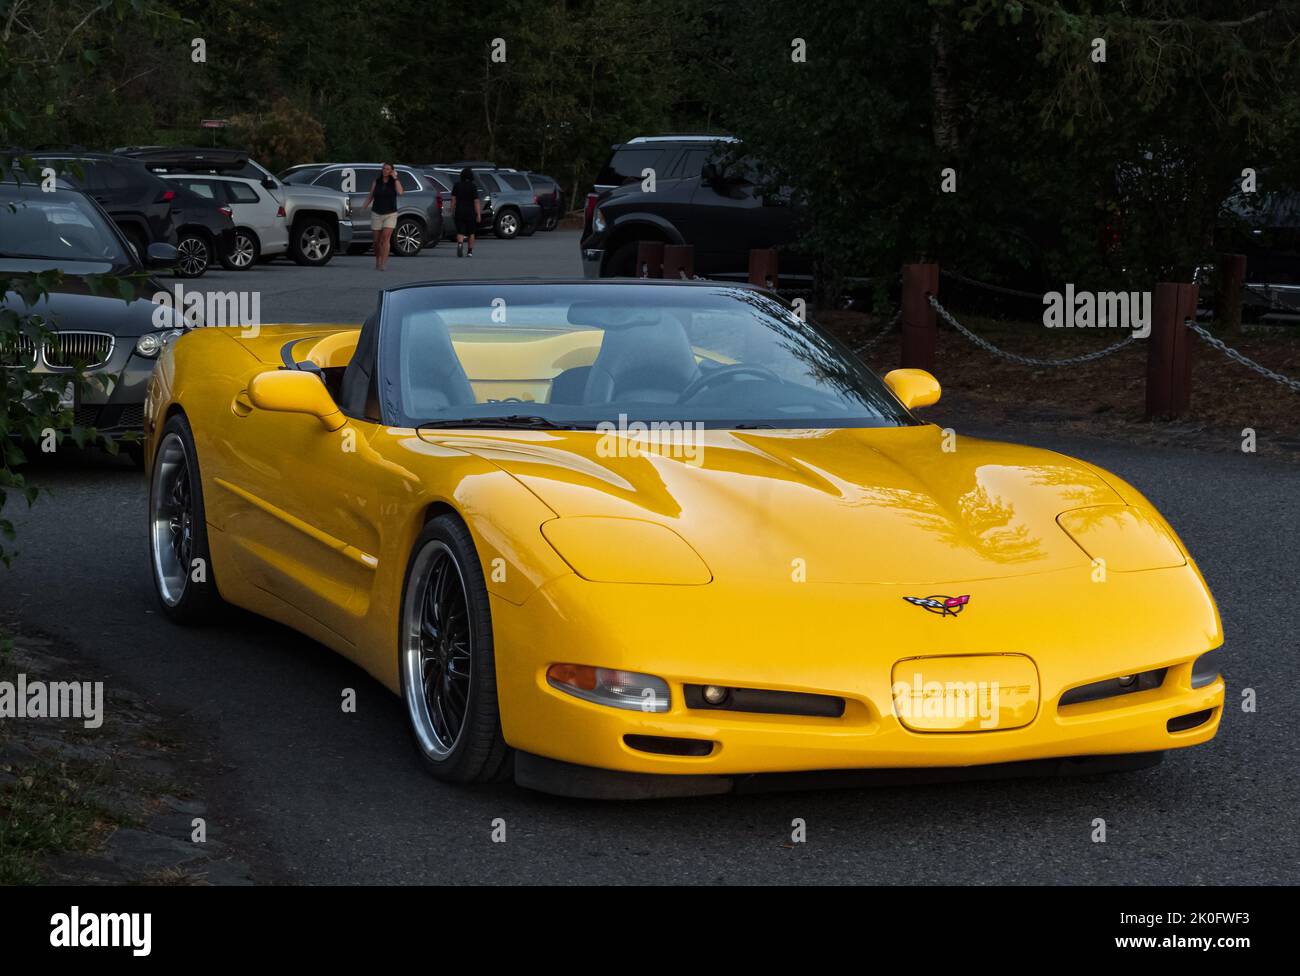 Yellow Chevrolet Corvette C5. The American muscle car Chevrolet C5 Corvette style includes 1997 through 2004-Vancouver BC Canada-August 18,2022. Trave Stock Photo